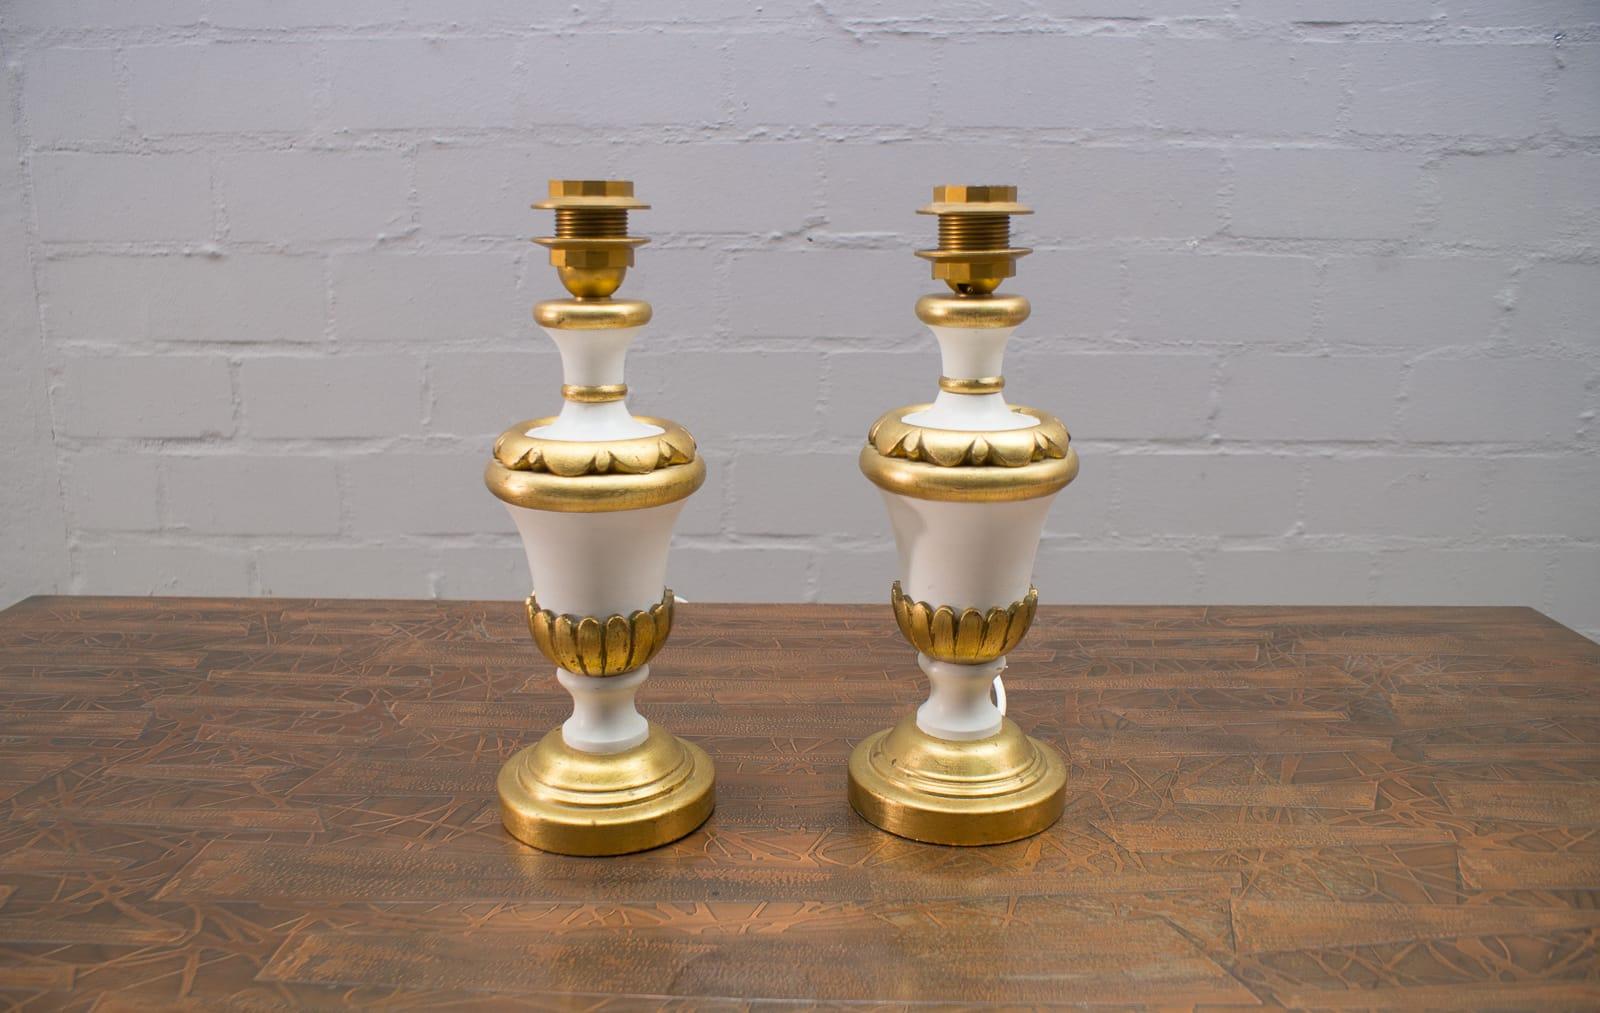 Gold-plated Italian table lamps in Hollywood Regency style. Elegant and noble is the great pair of lamps.
This set of two table lamps requires E27 bulbs. The height of the base without the shade is 37cm, diameter 13cm.